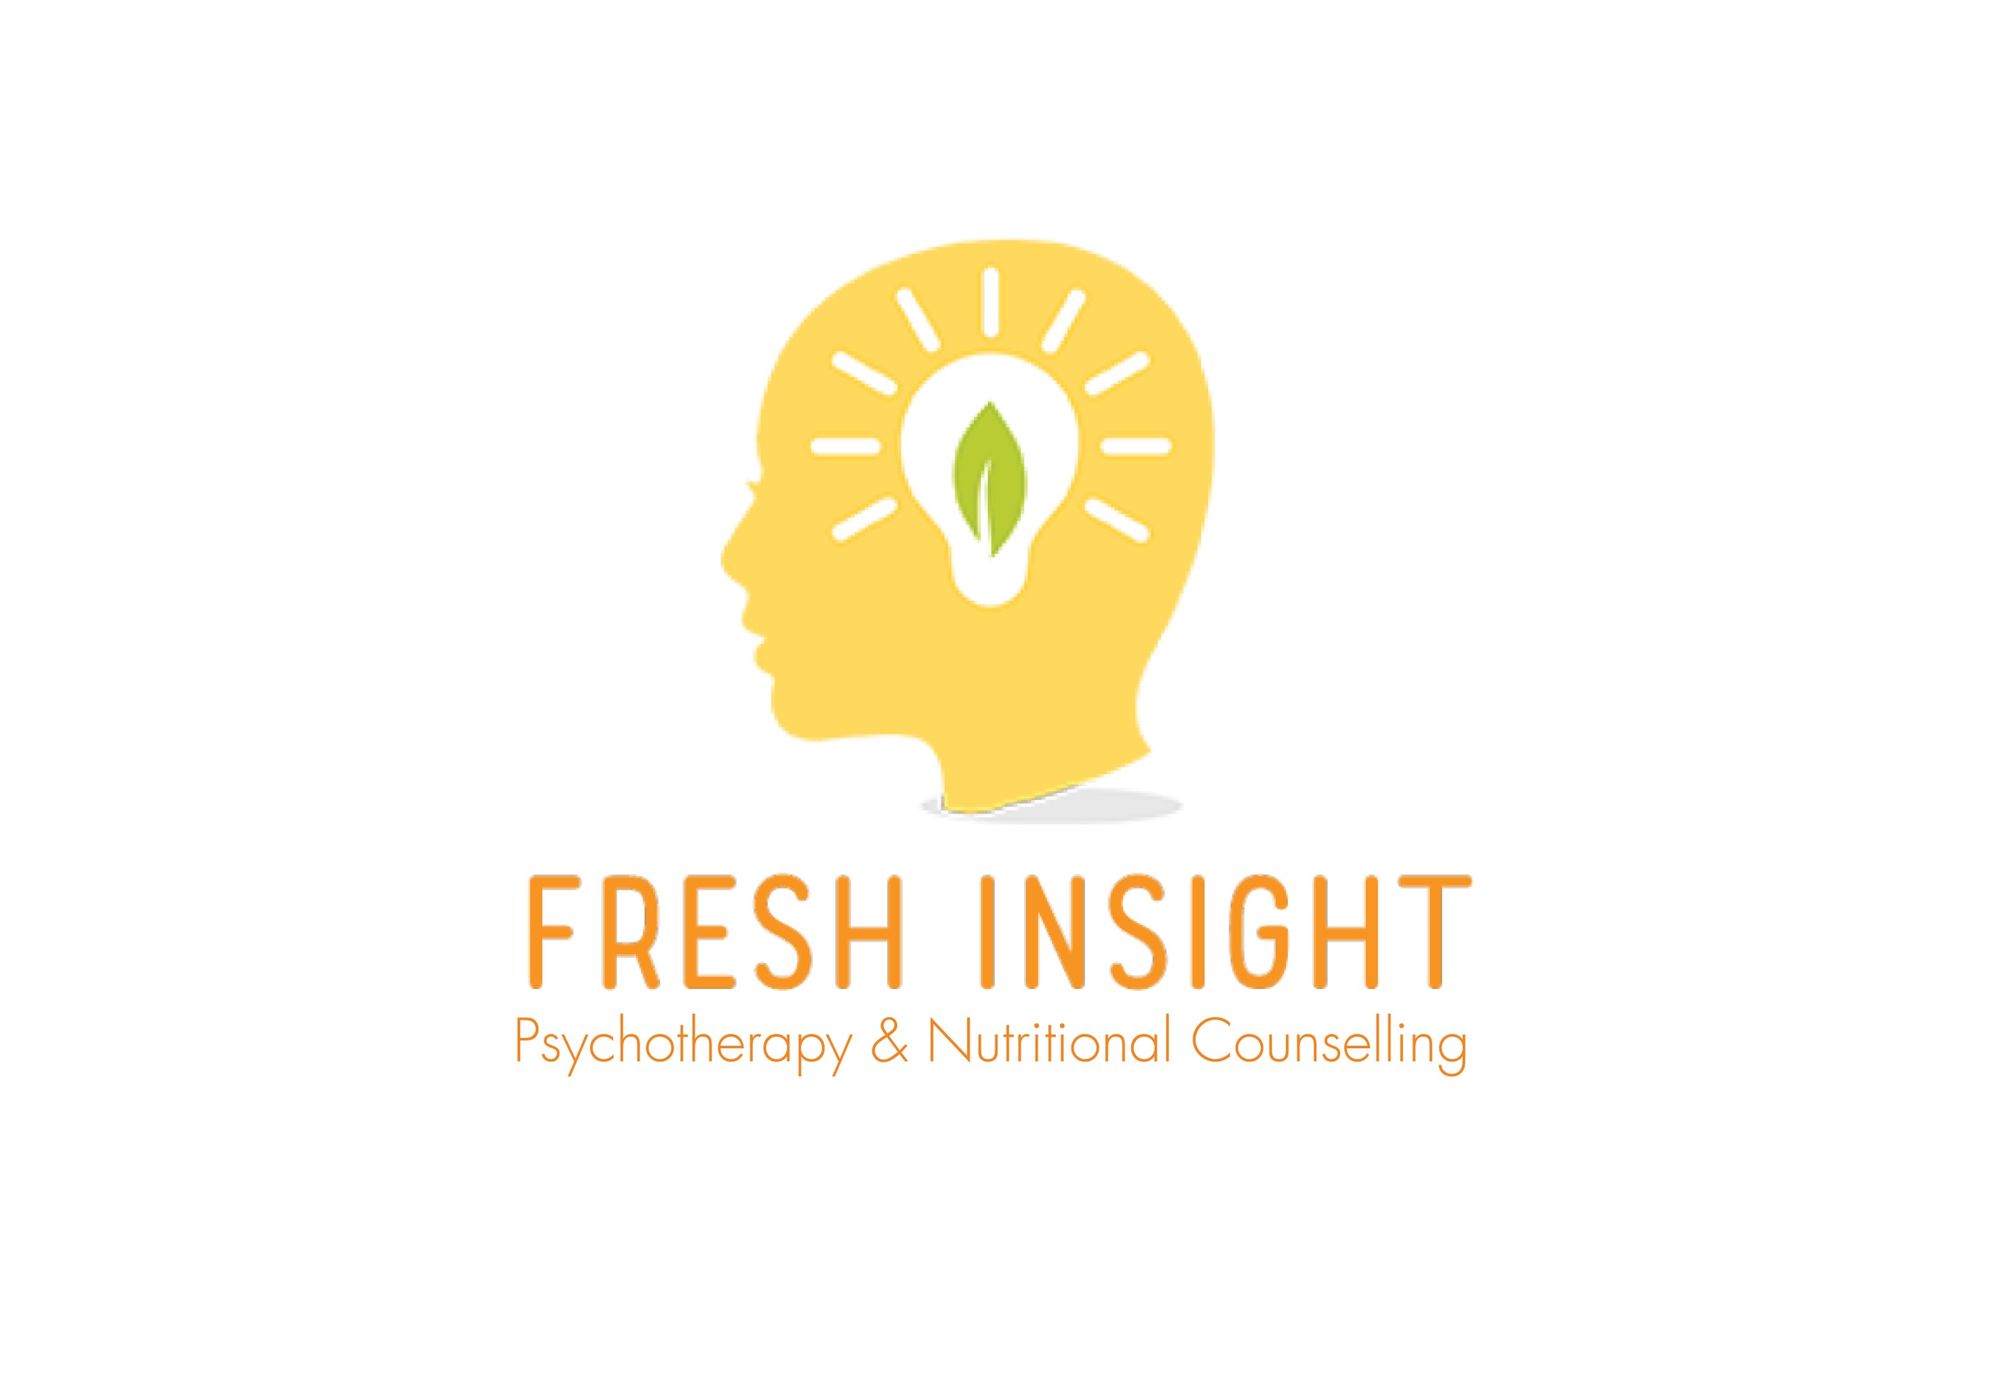 Exemplary Counselling and Education - Fresh Insight